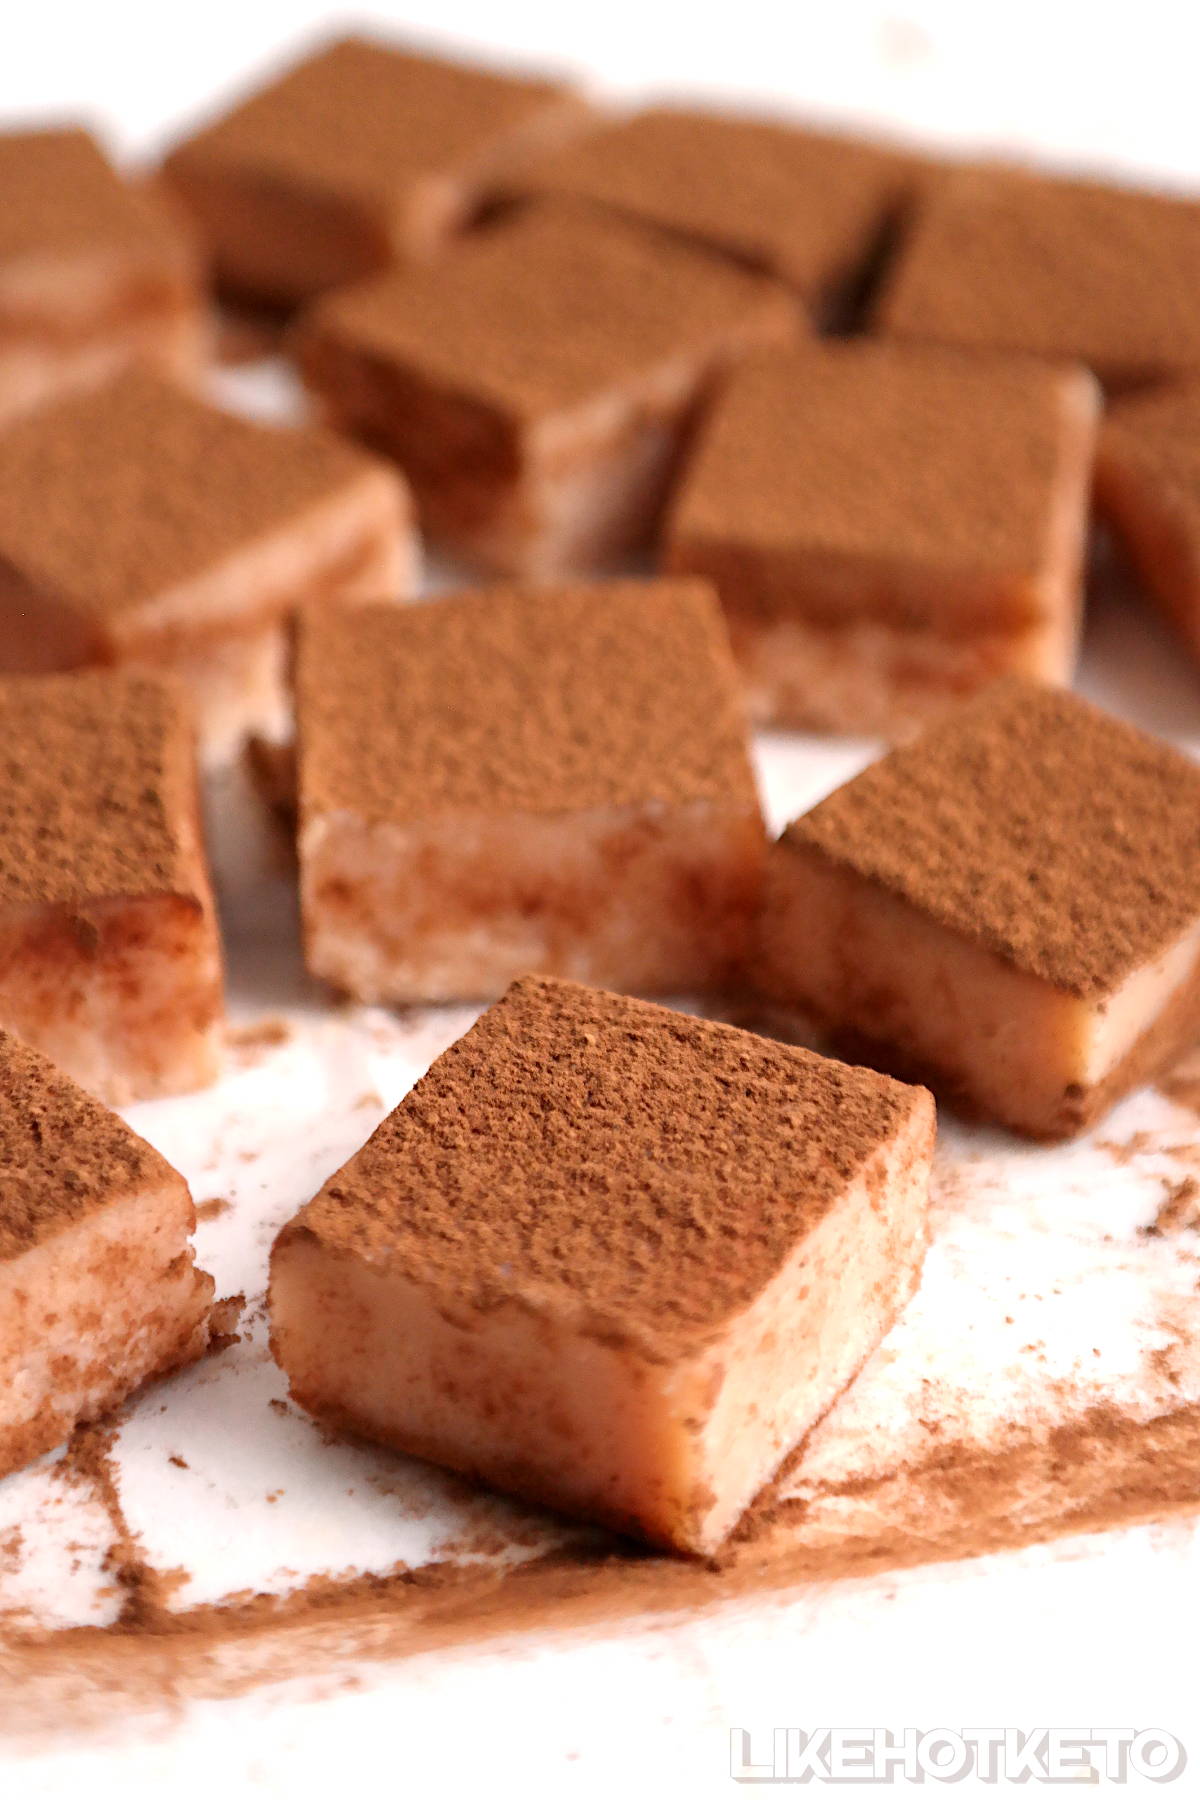 Low-carb Champagne flavor white chocolate truffles dusted with Dutch cocoa powder.